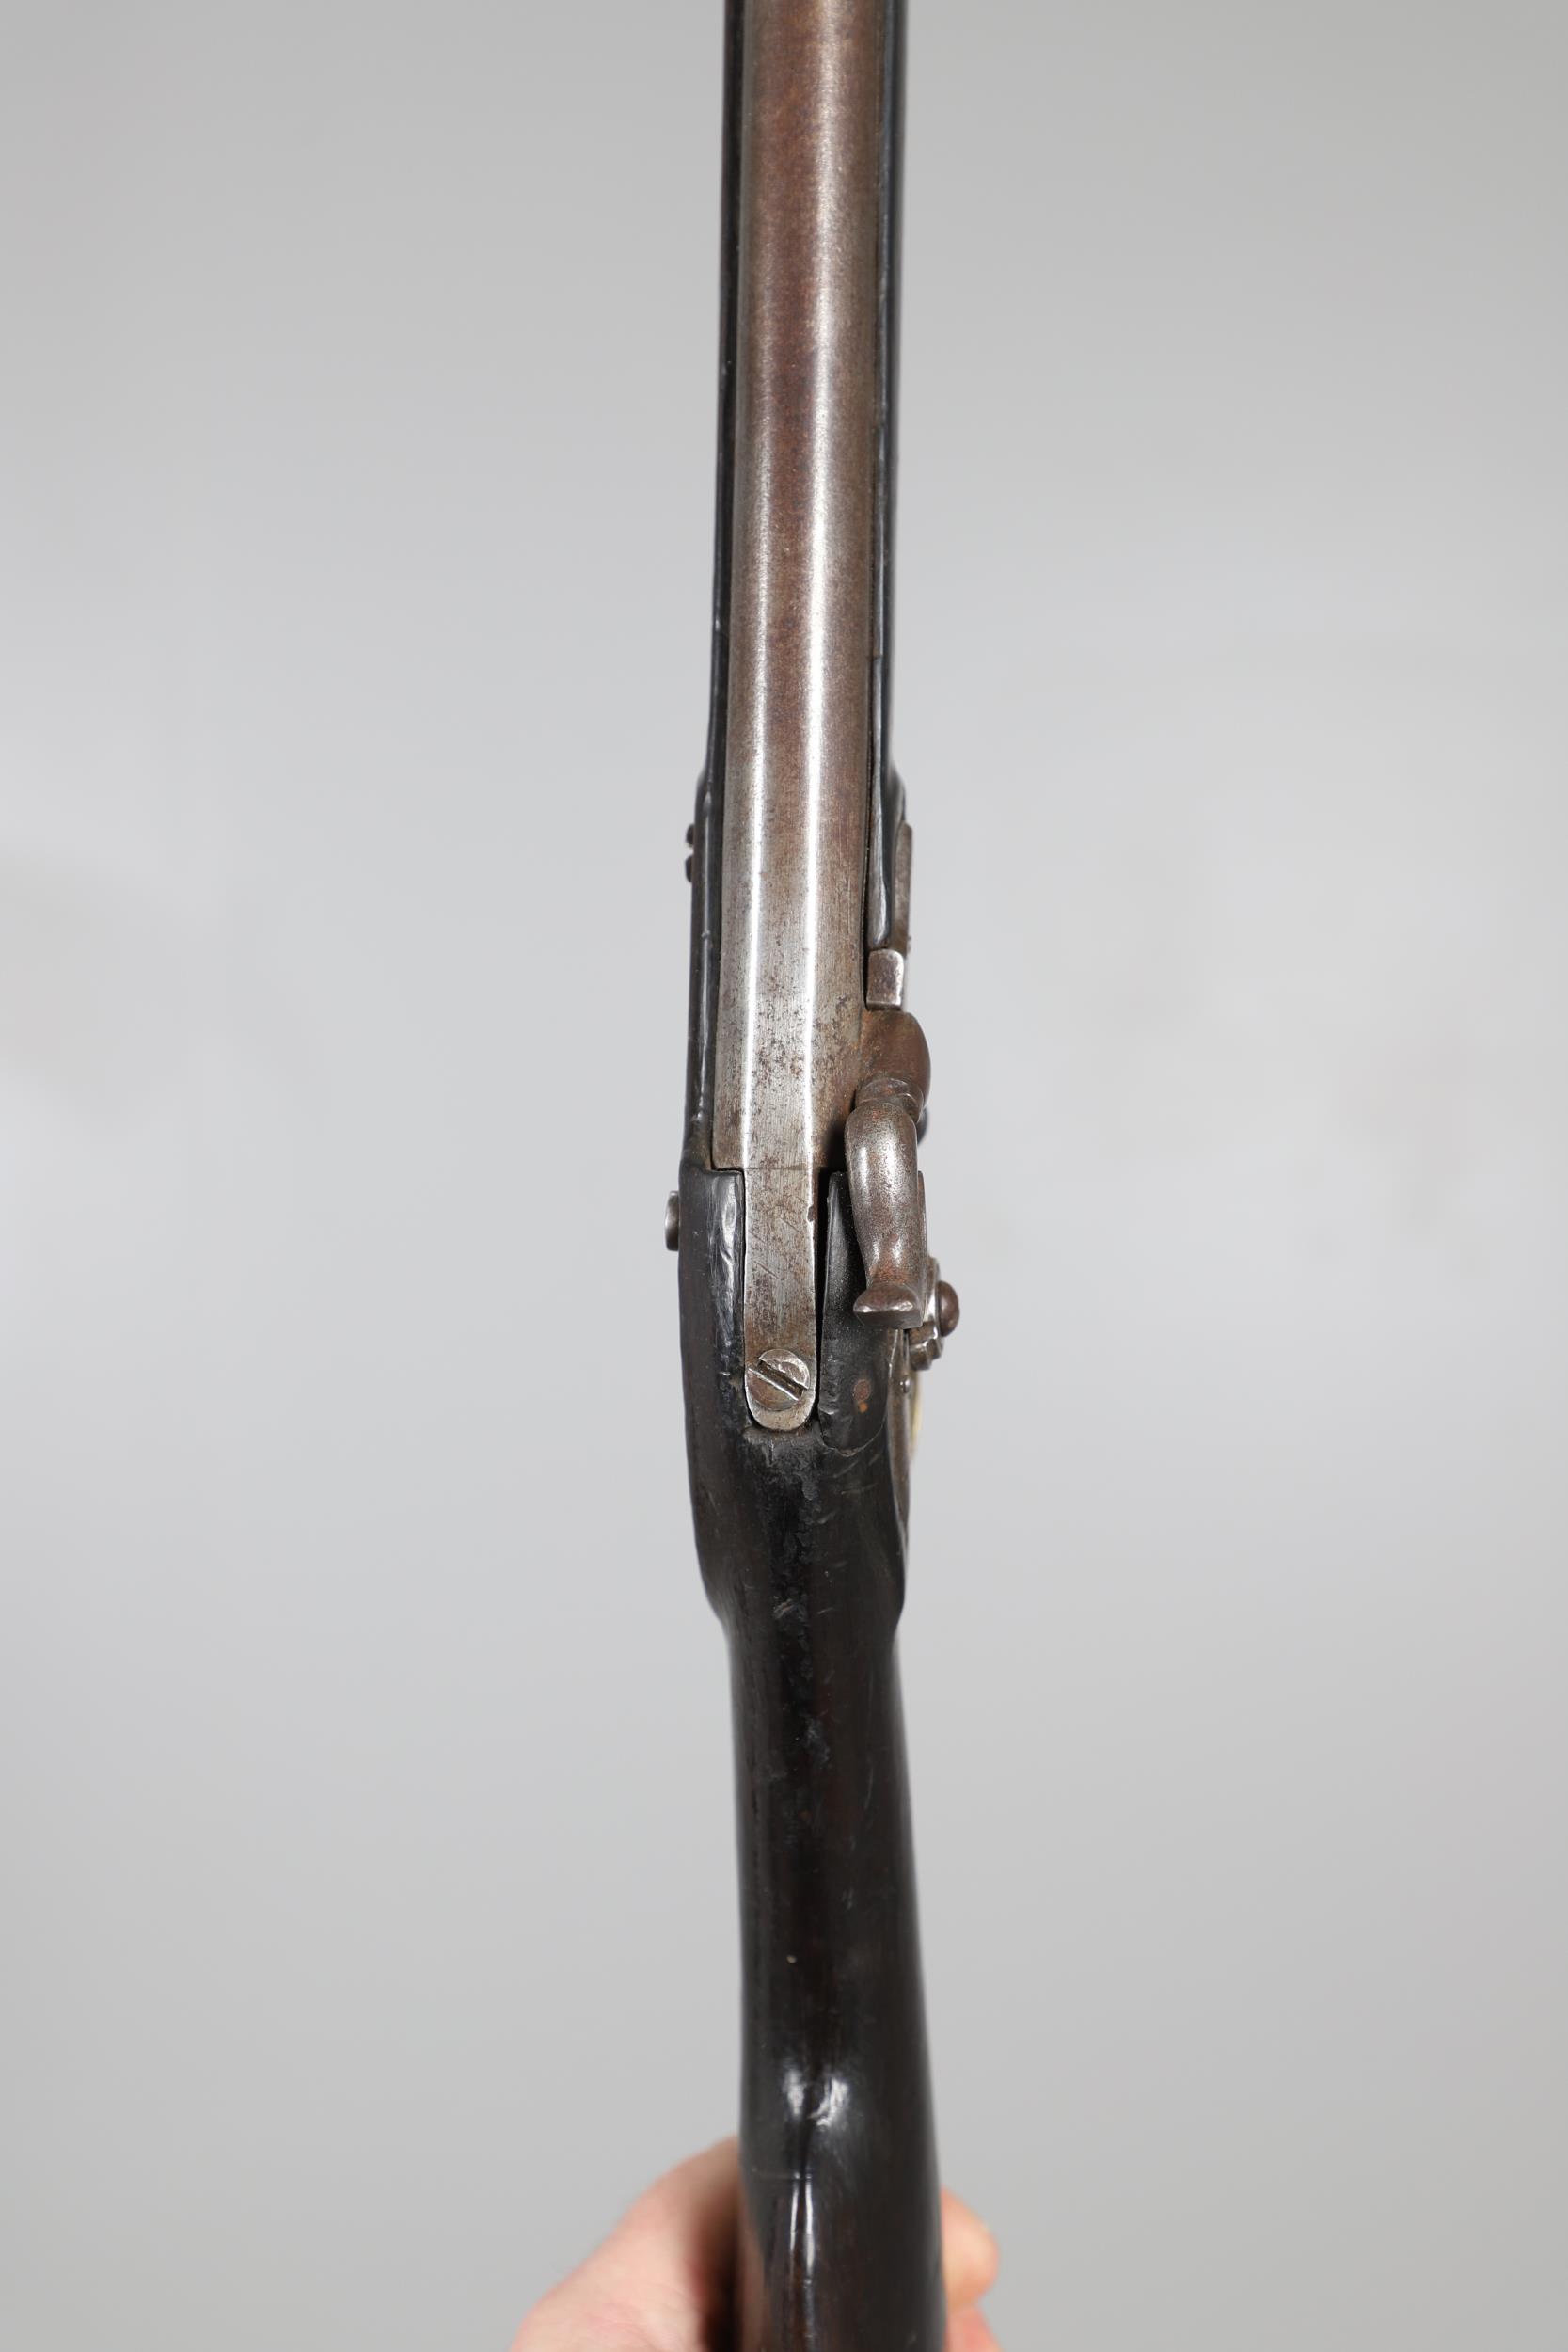 AN UNUSUAL MID 19TH CENTURY BAVARIAN ROYAL ARMY CADET'S PERCUSSION MUSKET. - Image 3 of 13